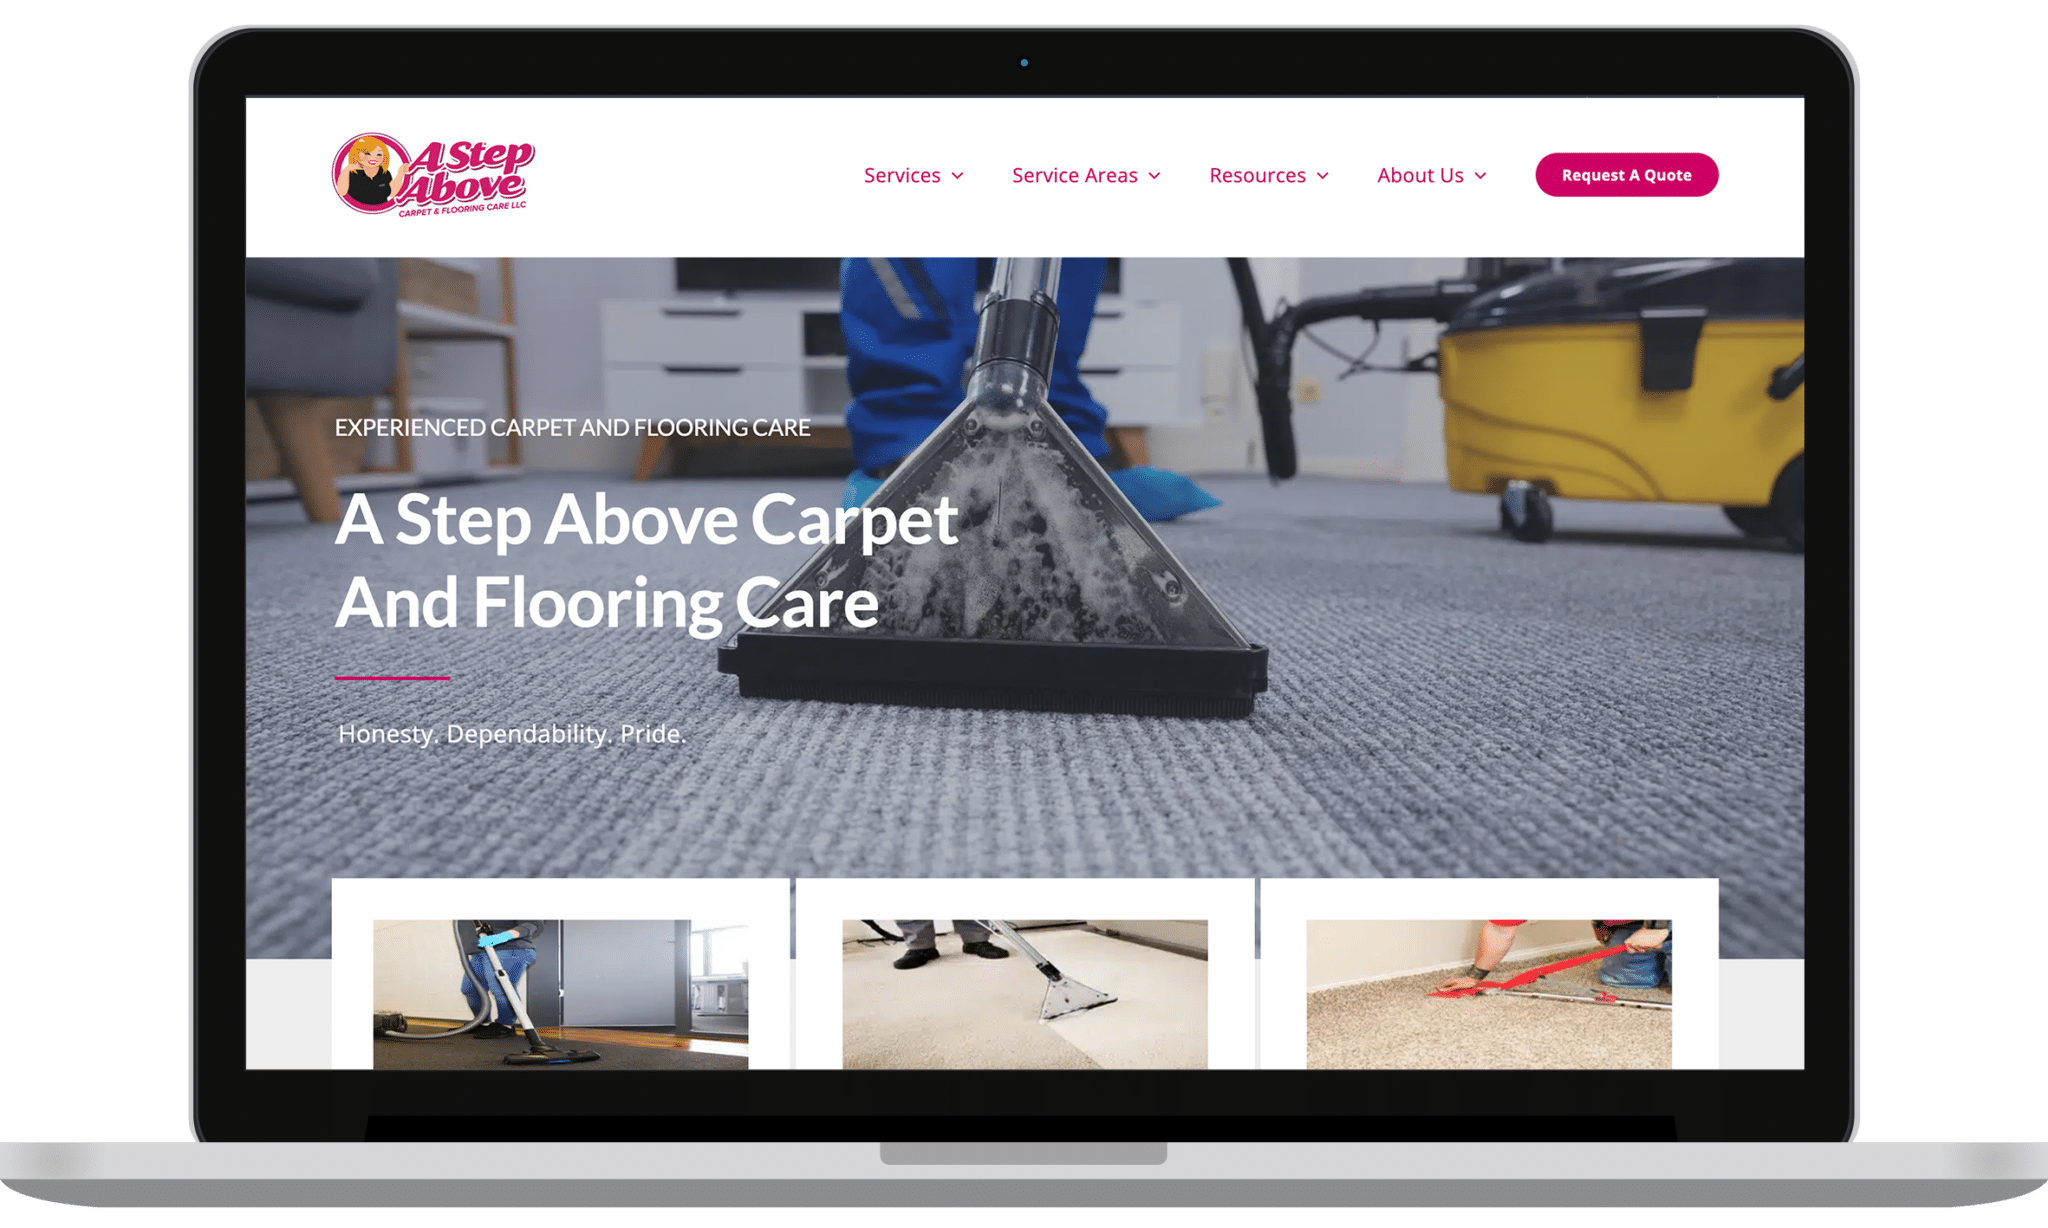 A Step Above Carpet and Flooring Care homescreen view.